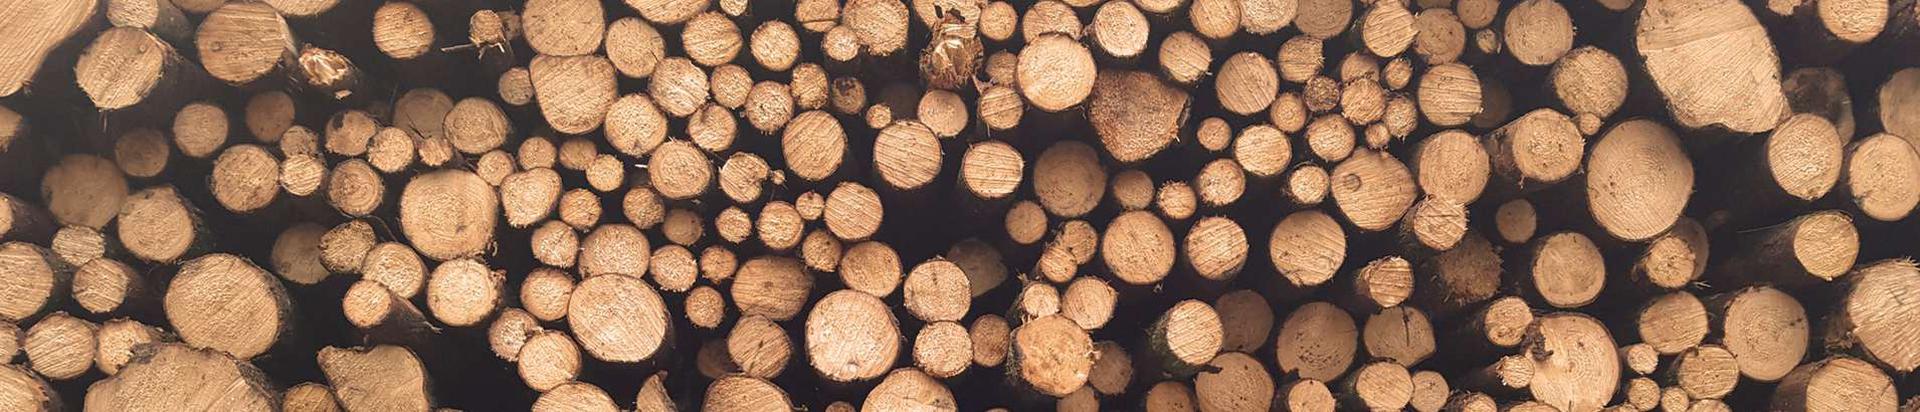 Wood and Paper Industry and other related services, products, consultations